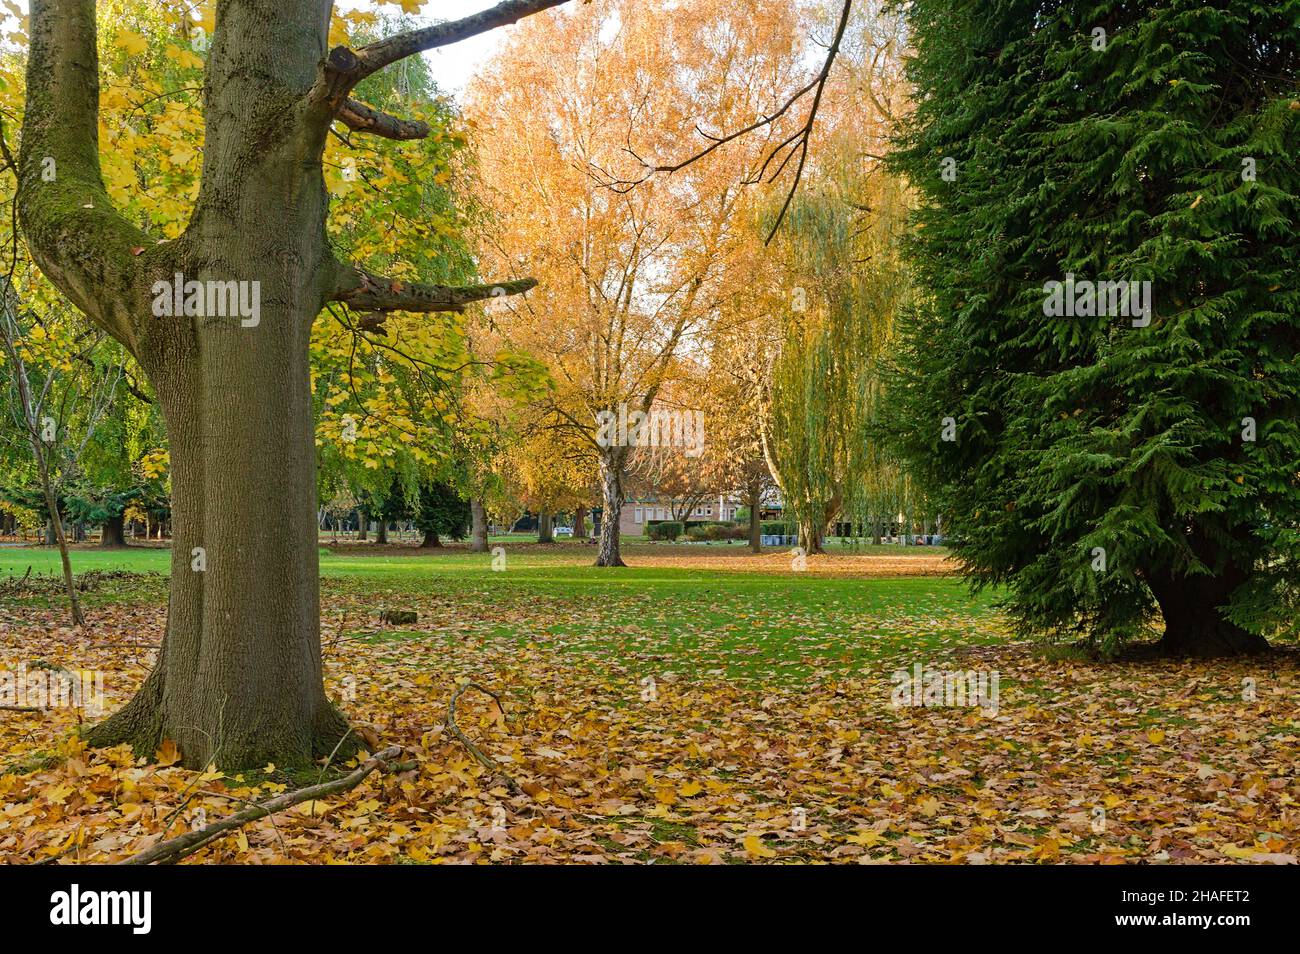 Autumn trees and fallen leaves on the grass in the old Victorian cemetery with the crem building in background. Stock Photo